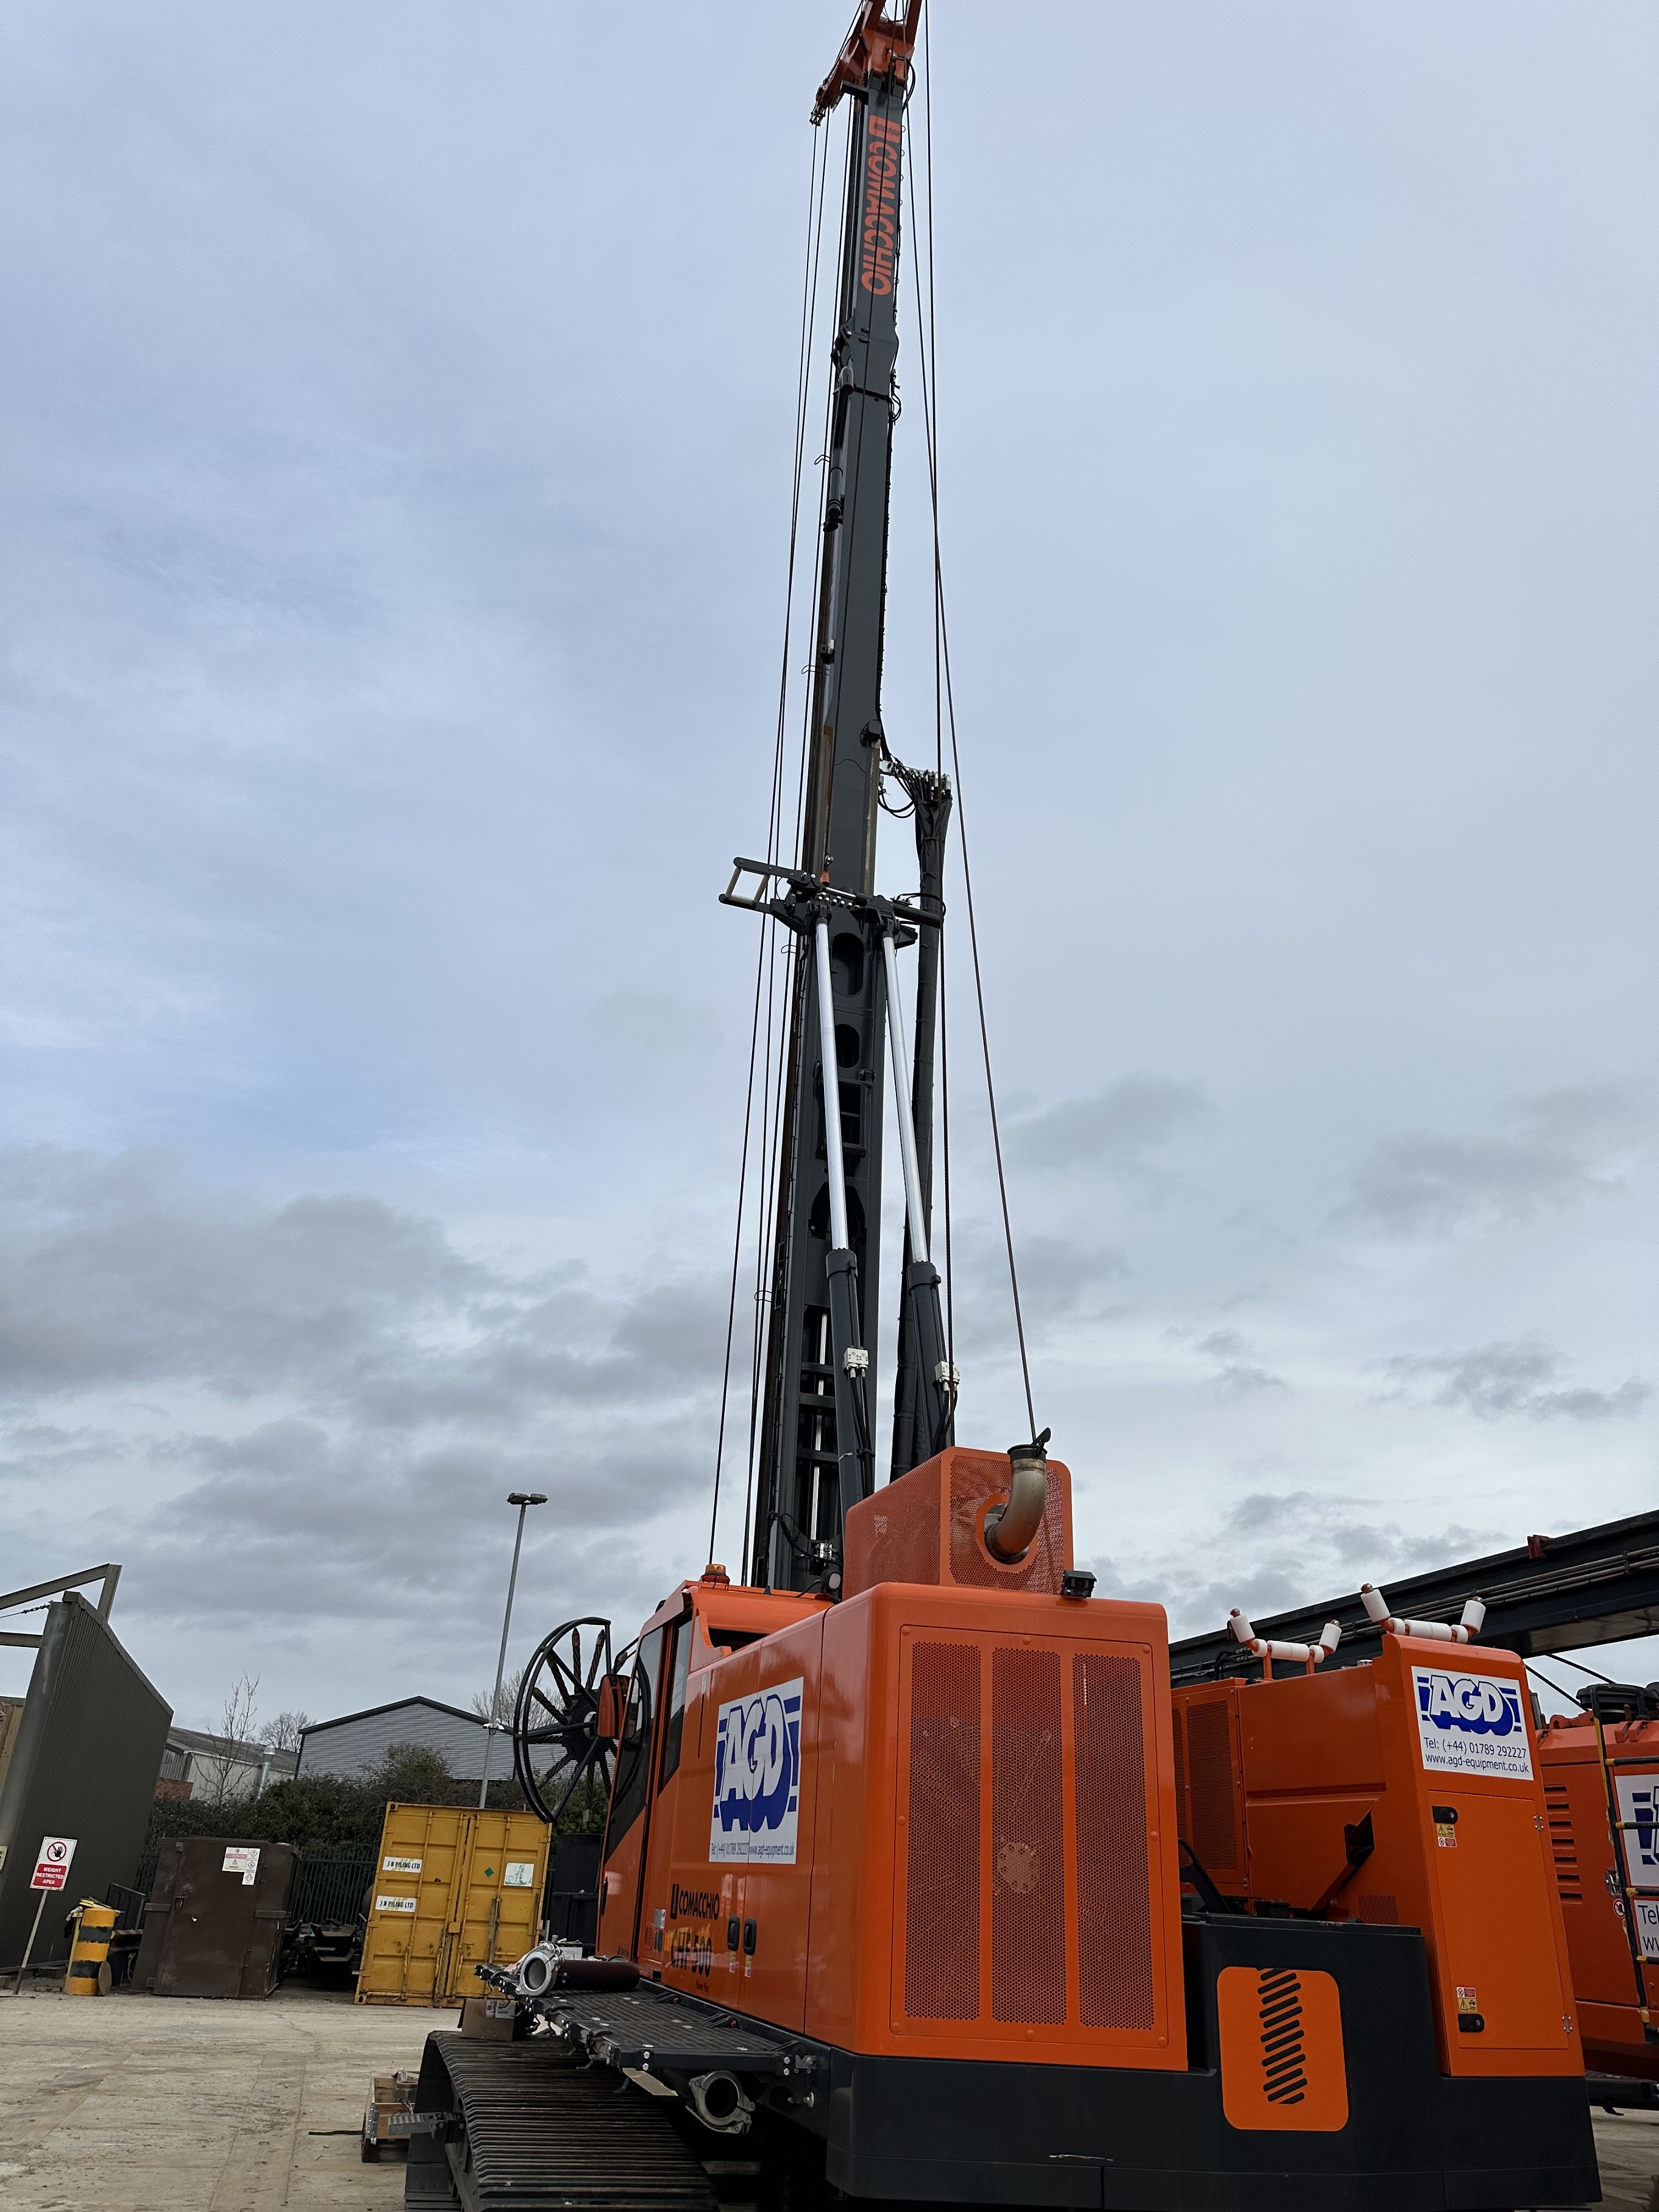 Suppliers of Comacchio Rotary Piling Rigs For Hire UK